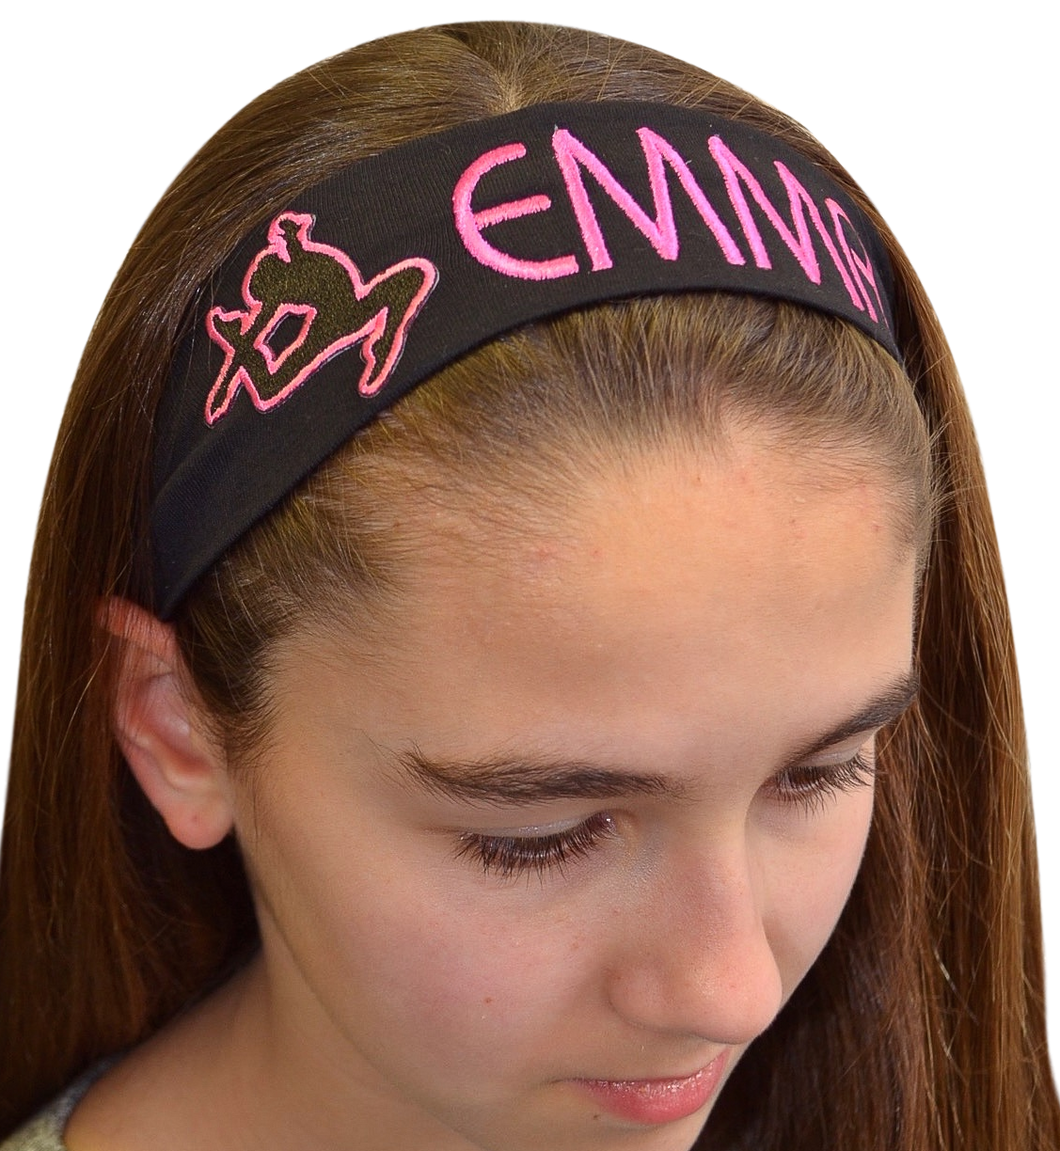 Personalized Monogrammed EMBROIDERED Gymnastics Cotton Stretch Headband - Quantity Discounts